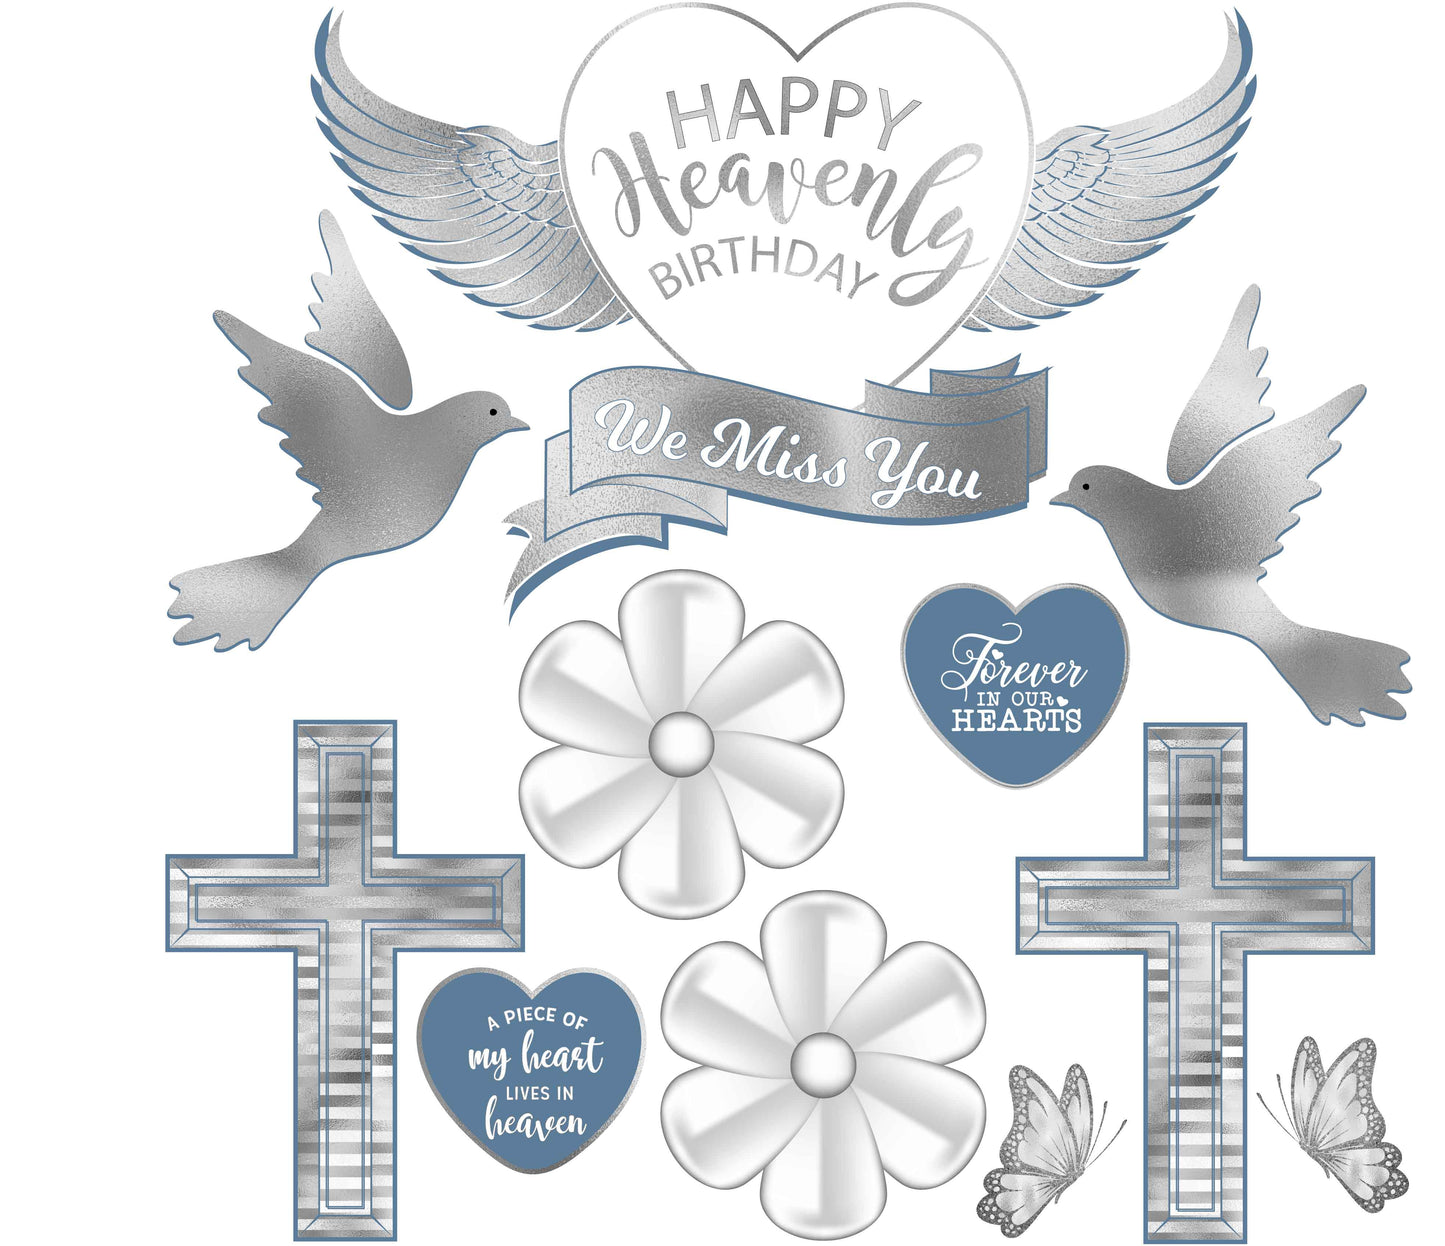 Happy Heavenly Birthday White & Slate Theme Half Sheet Misc. (Must Purchase 2 Half sheets - You Can Mix & Match)